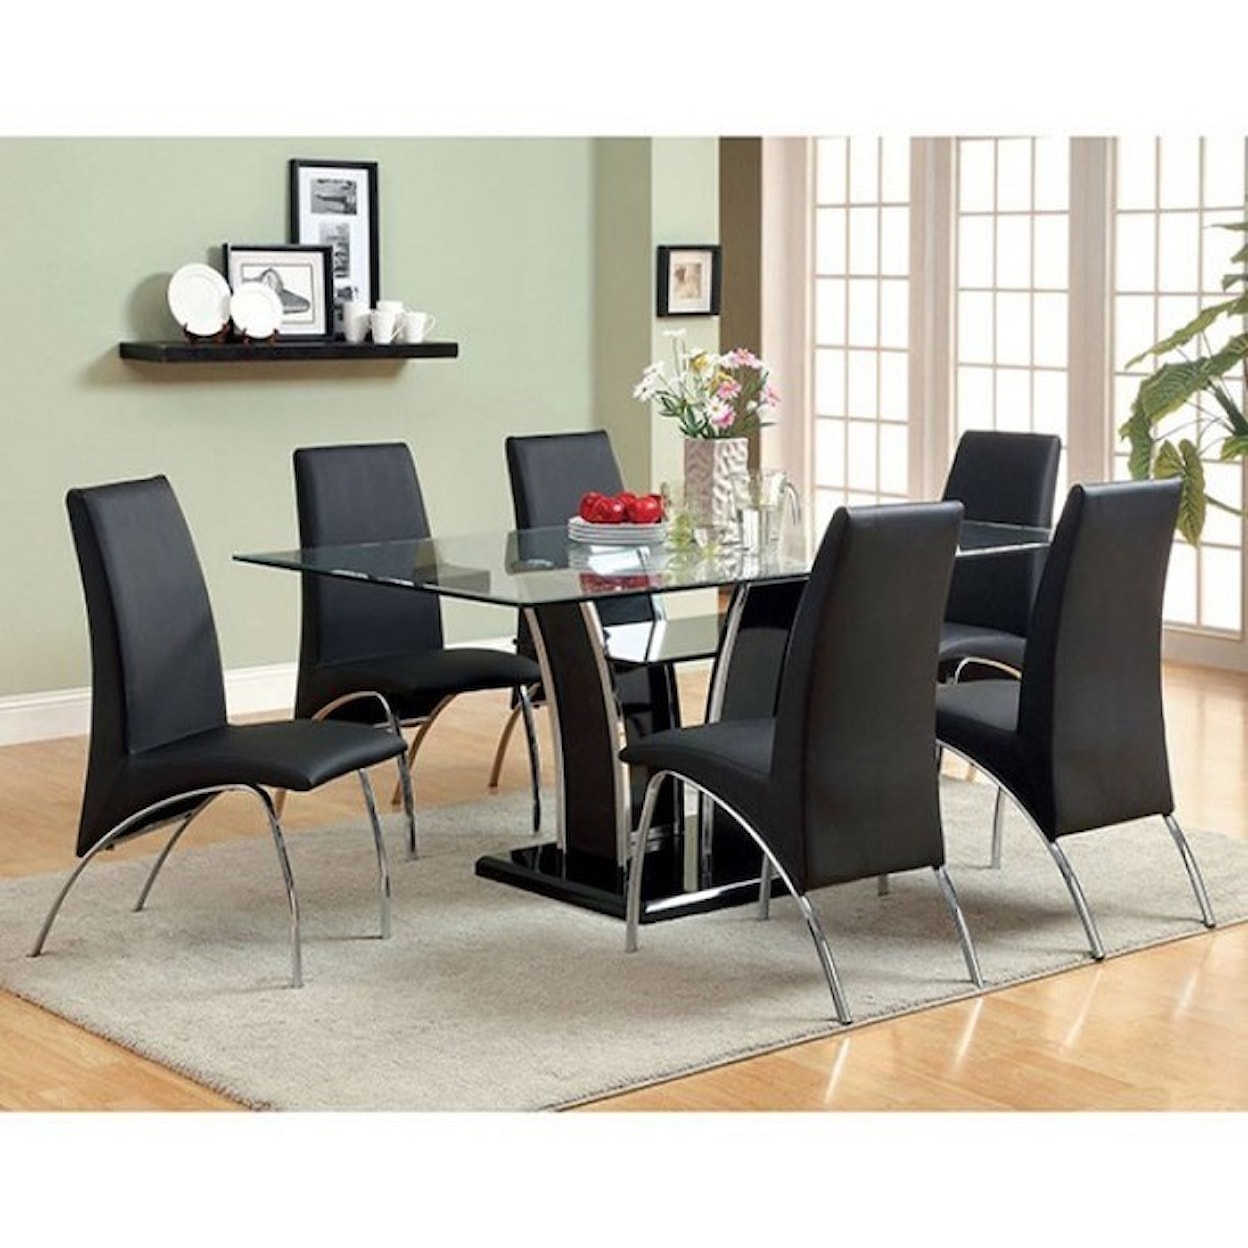 Furniture of America Glenview 7-Piece Dining Set